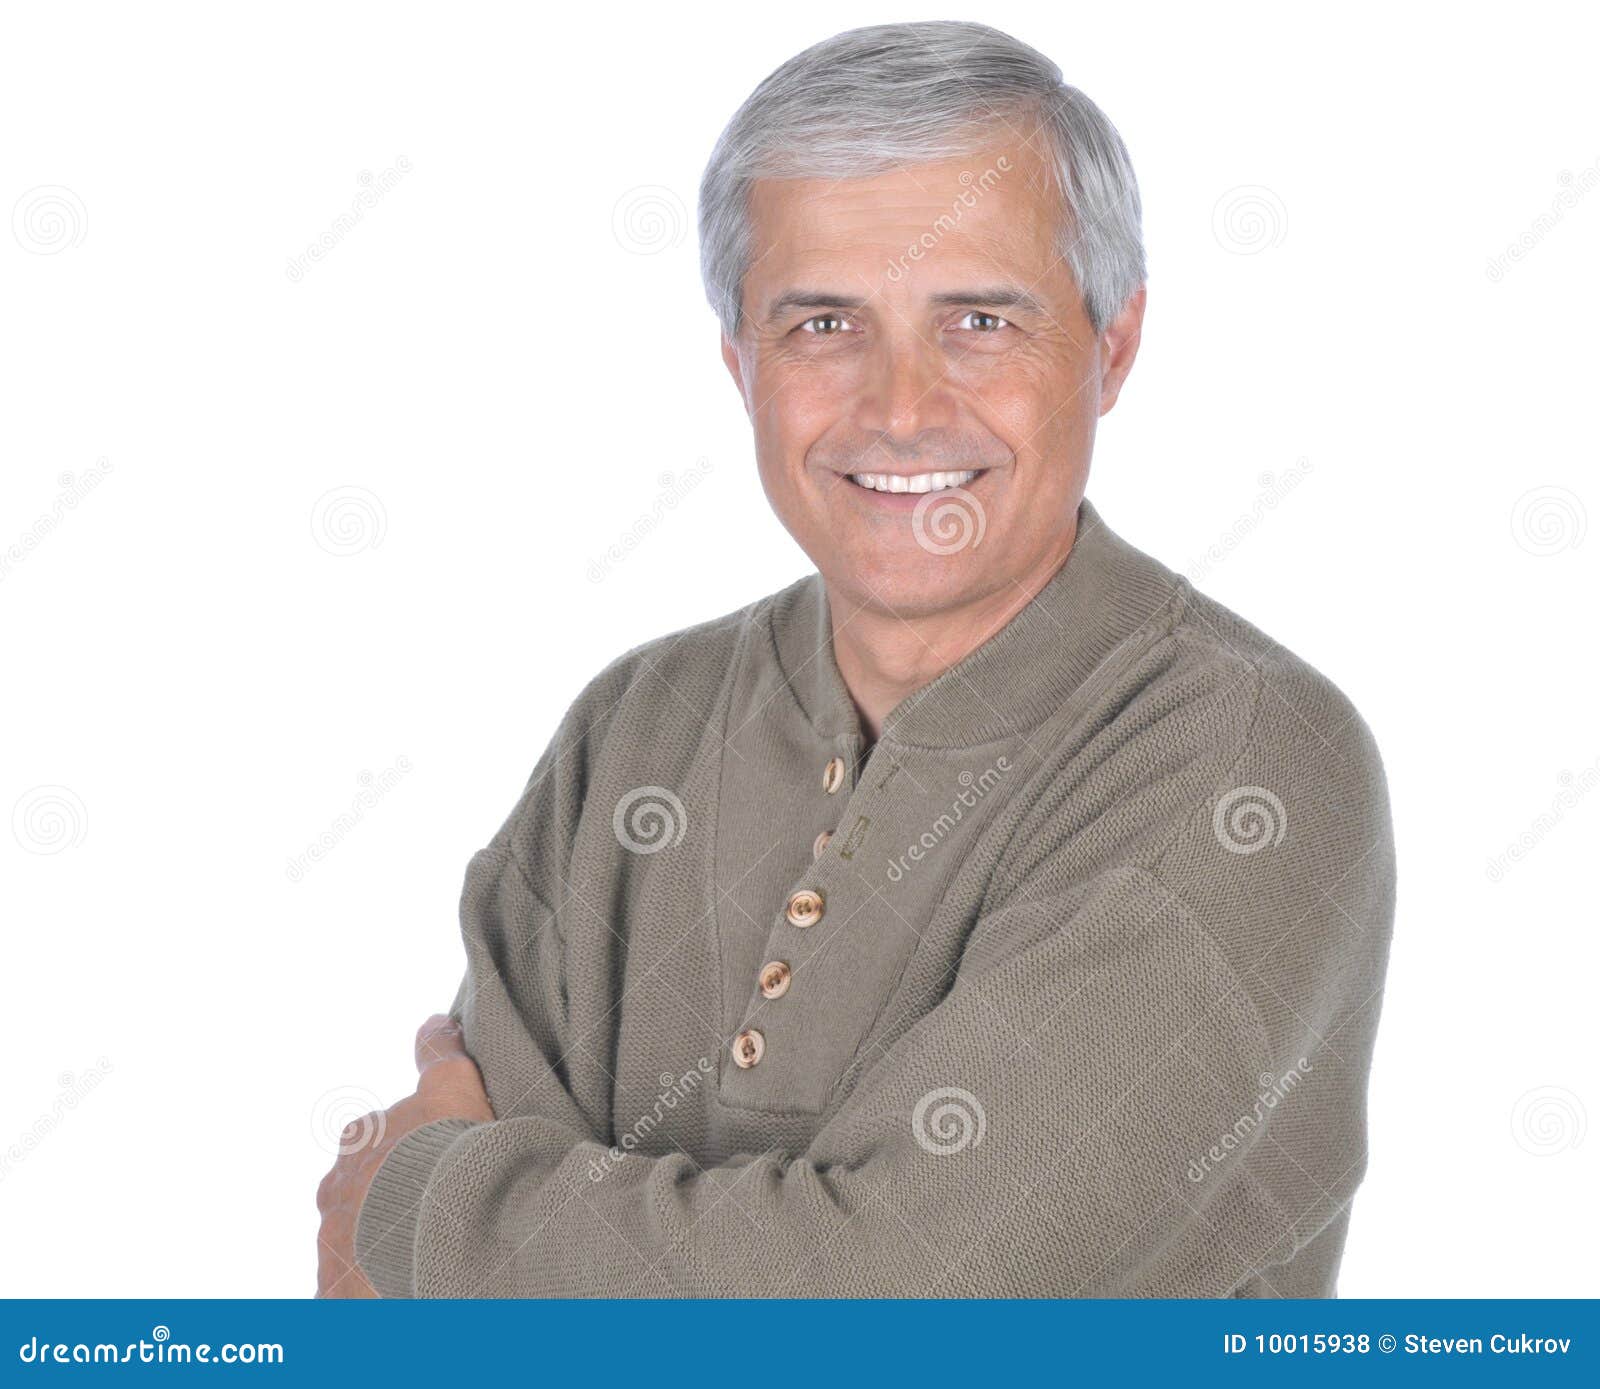 1,855 Middle Aged Man Candid Stock Photos - Free & Royalty-Free